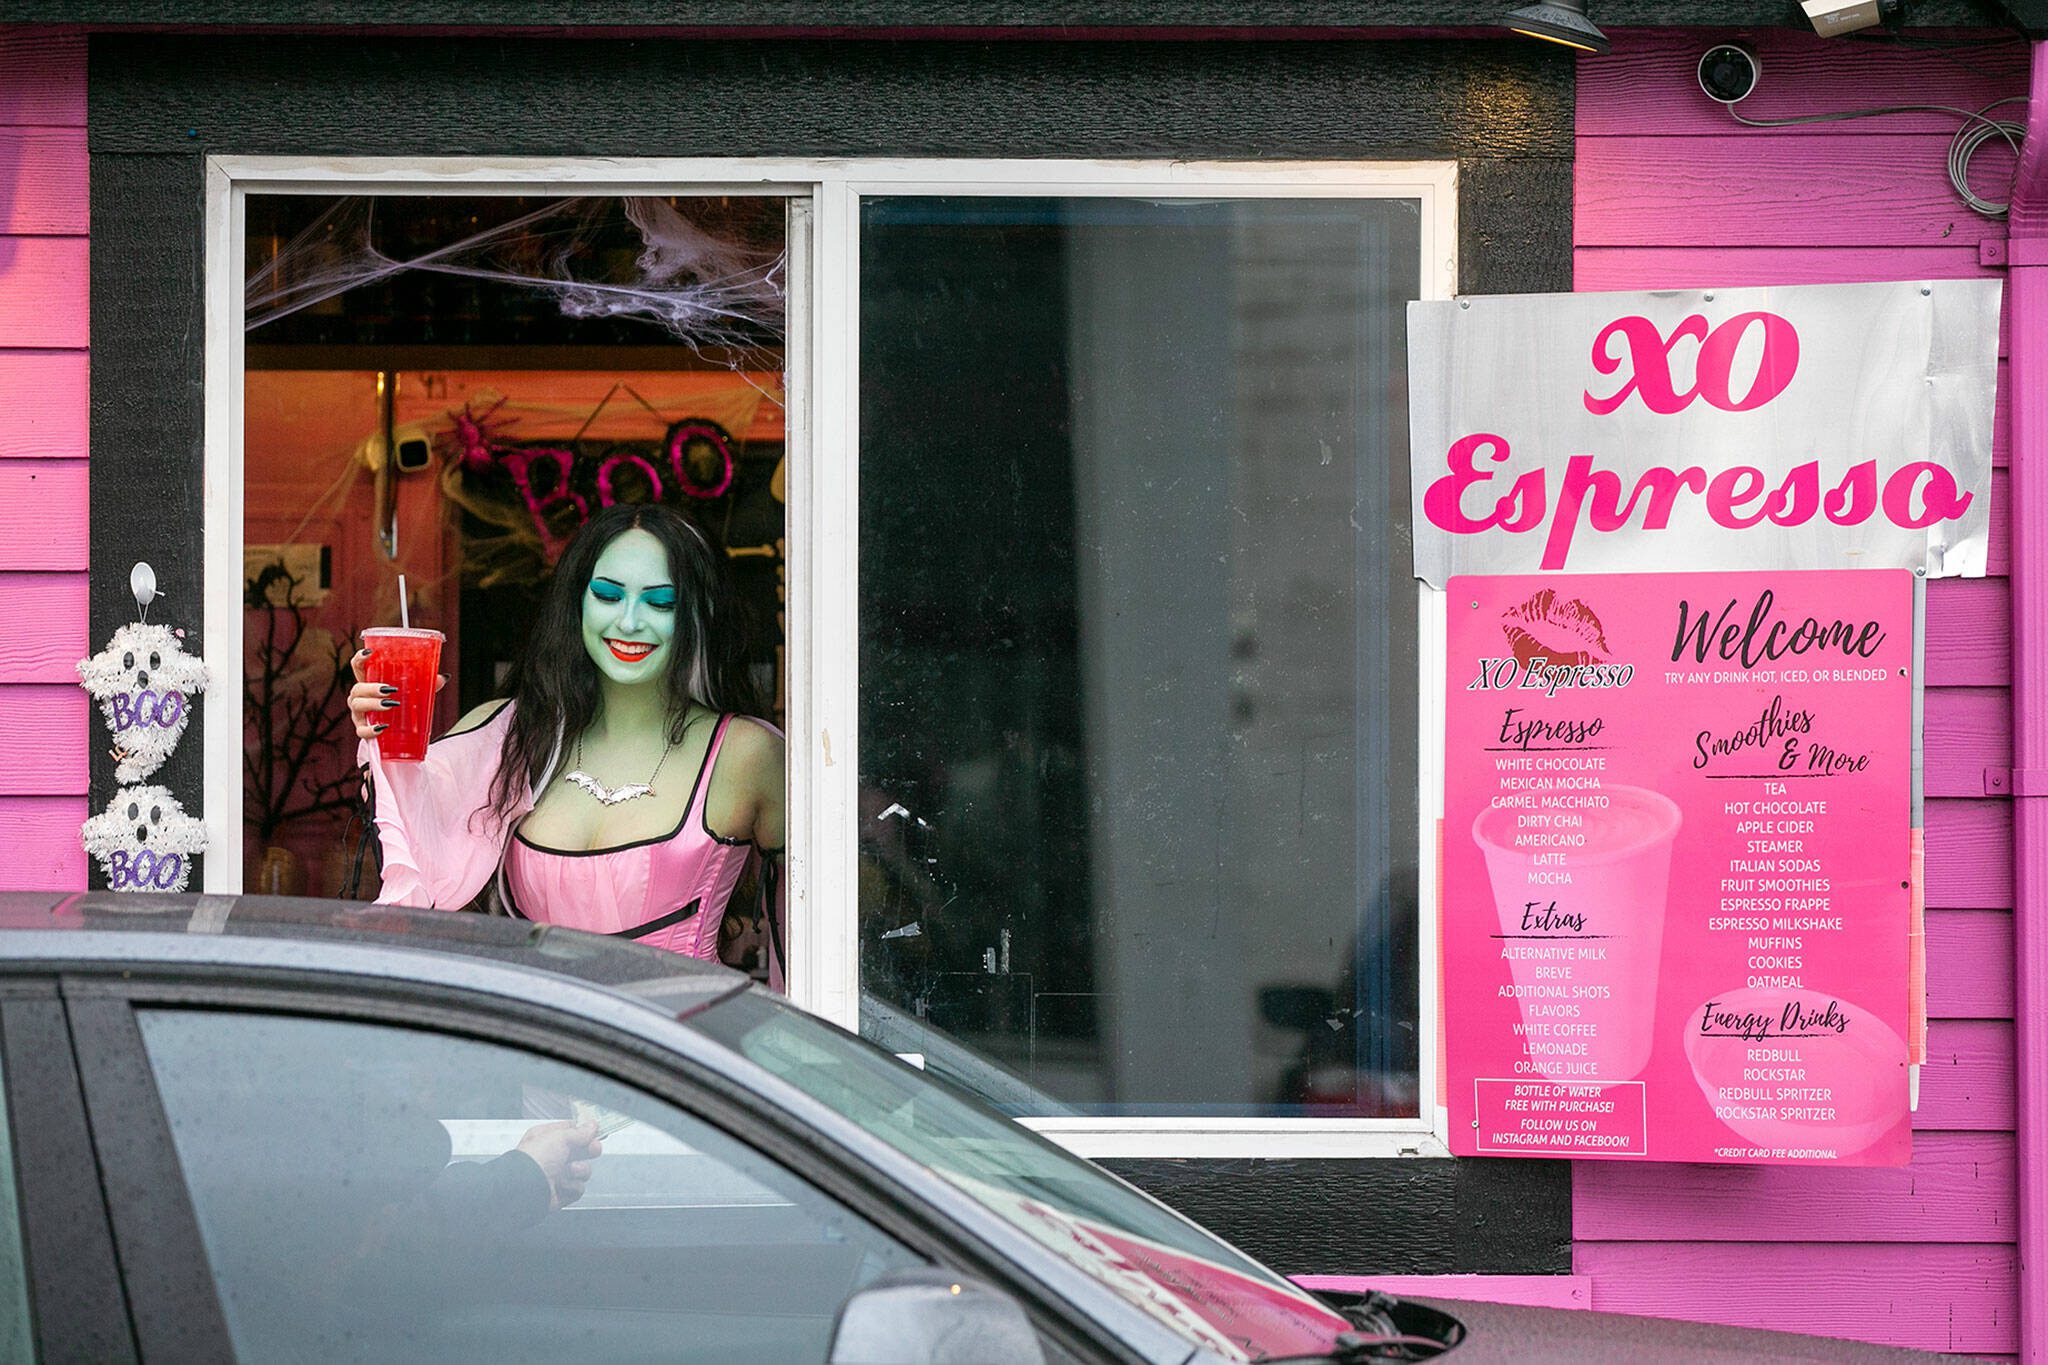 Emma Dilemma, a makeup artist and bikini barista, serves a drink to a customer while dressed as Lily Munster on Oct. 25, 2022, at XO Espresso on 41st Street in Everett, Washington. (Ryan Berry / The Herald)